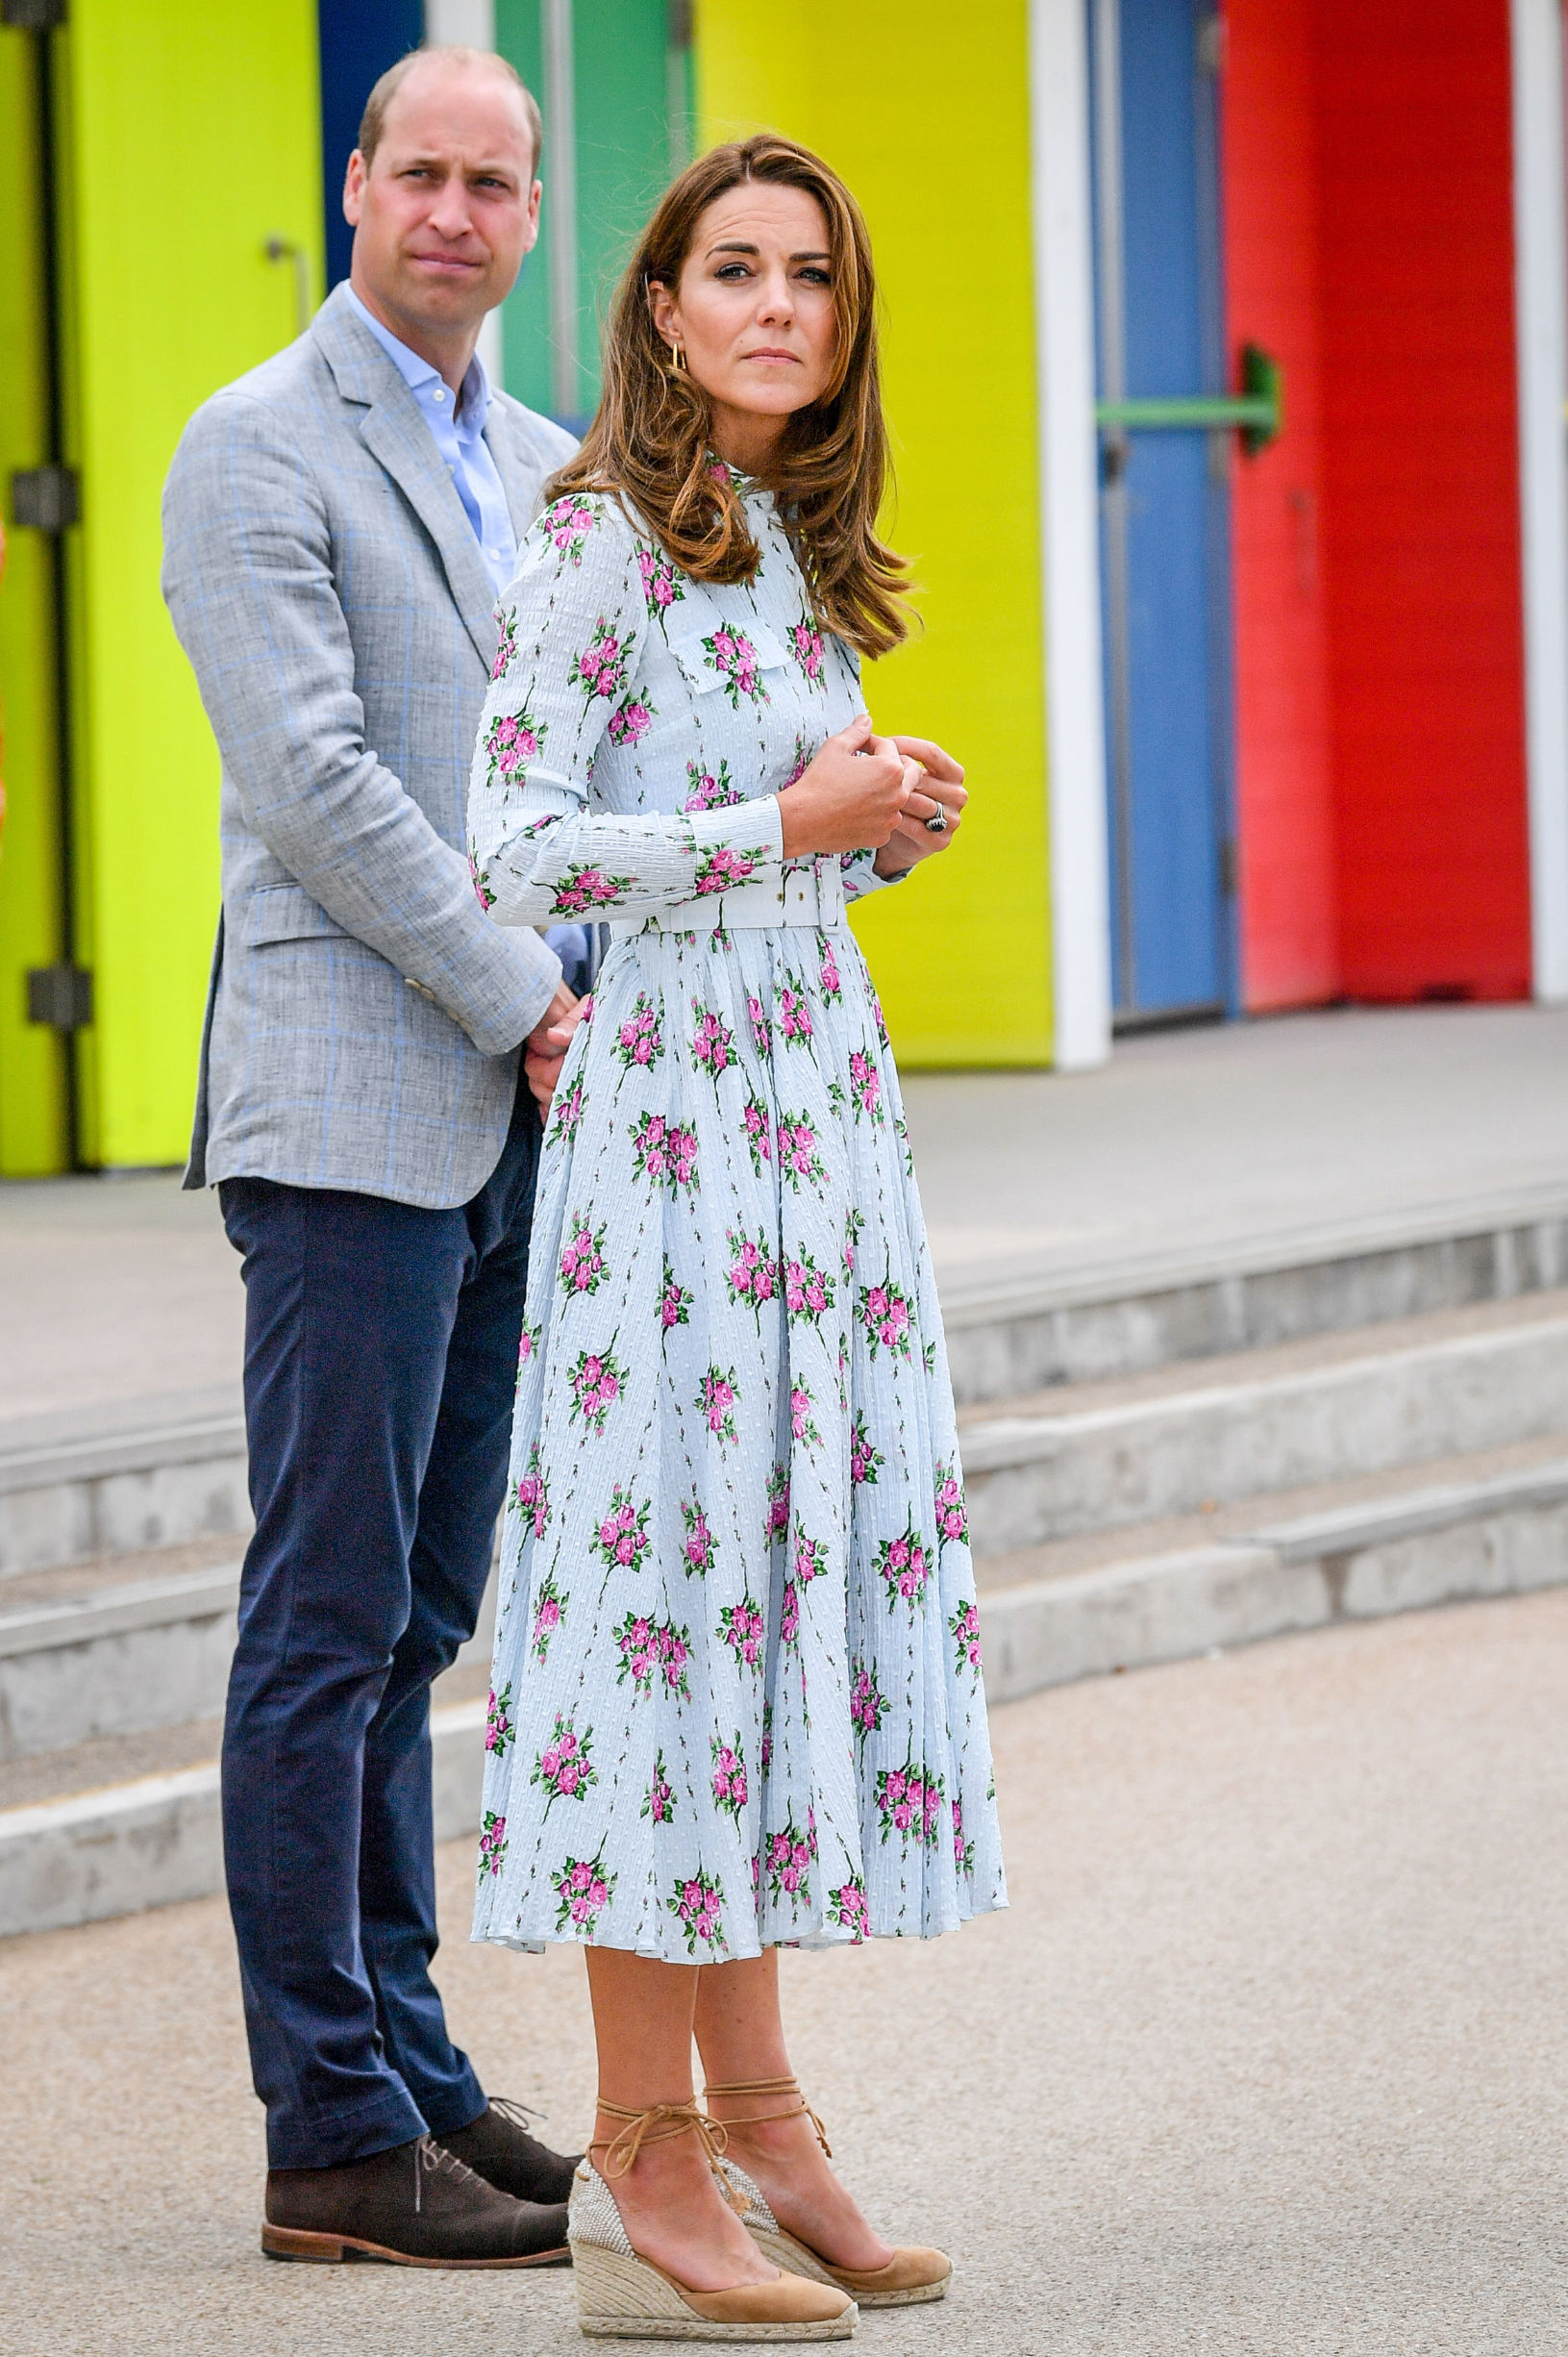 The Duke and Catherine Duchess of Cambridge on the promenade as they visit beach huts, during their visit to Barry Island, South Wales, to speak to local business owners about the impact of Covid-19 on the tourism sector
The Duke and Duchess of Cambridge visit Barry Island, South Wales, Uk - 05 Aug 2020,Image: 550116953, License: Rights-managed, Restrictions: , Model Release: no, Credit line: - / Shutterstock Editorial / Profimedia